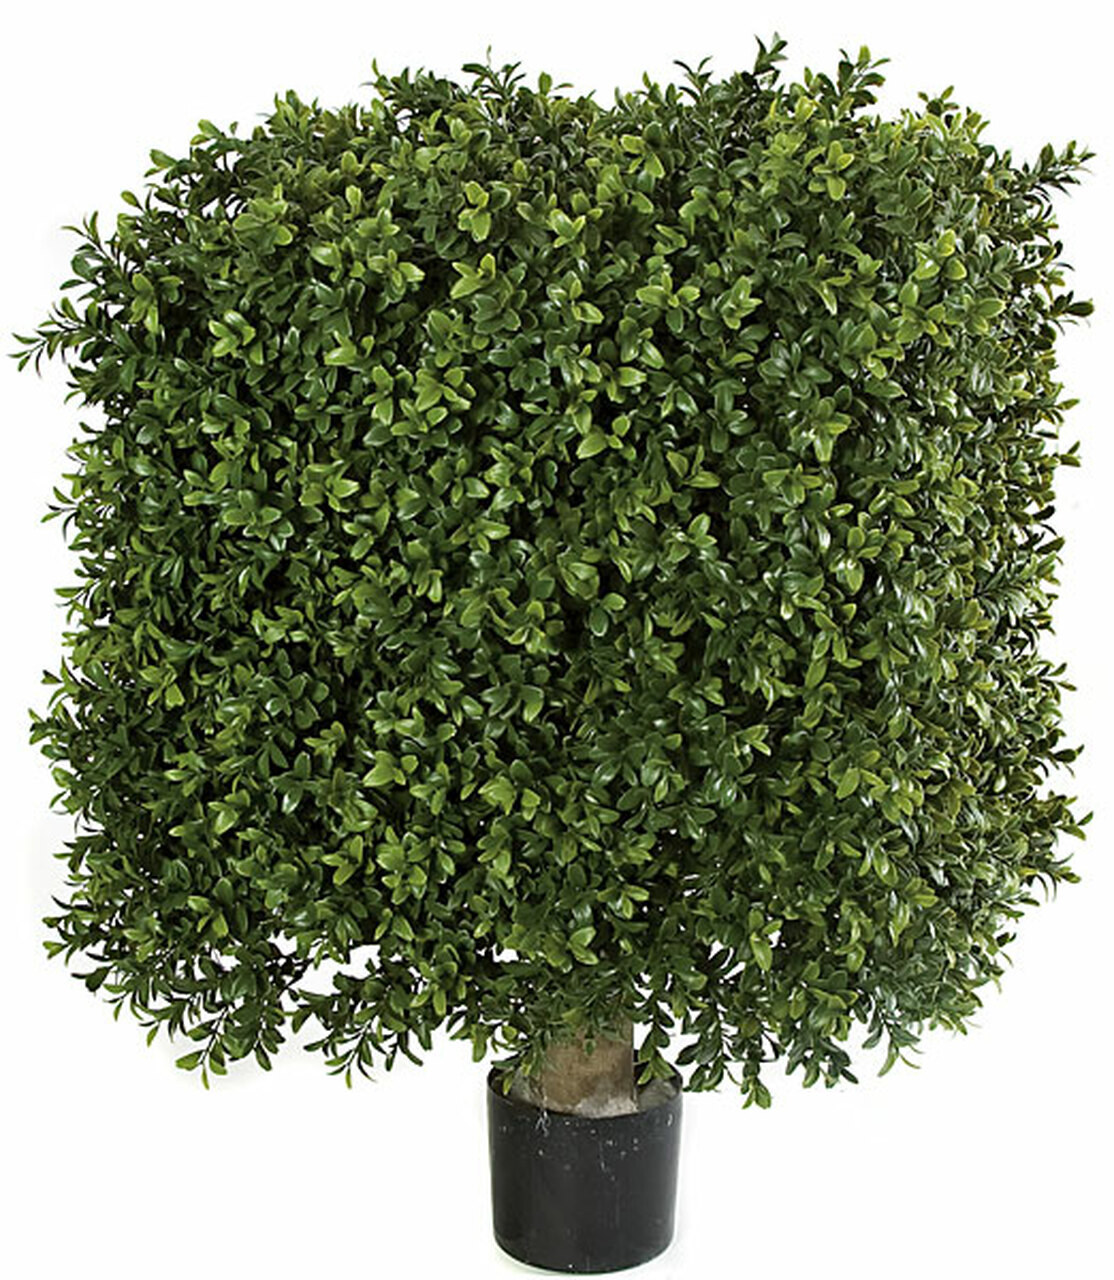 25 inch and 18 inch Plastic Boxwood Square Topiary and Limited UV Protection